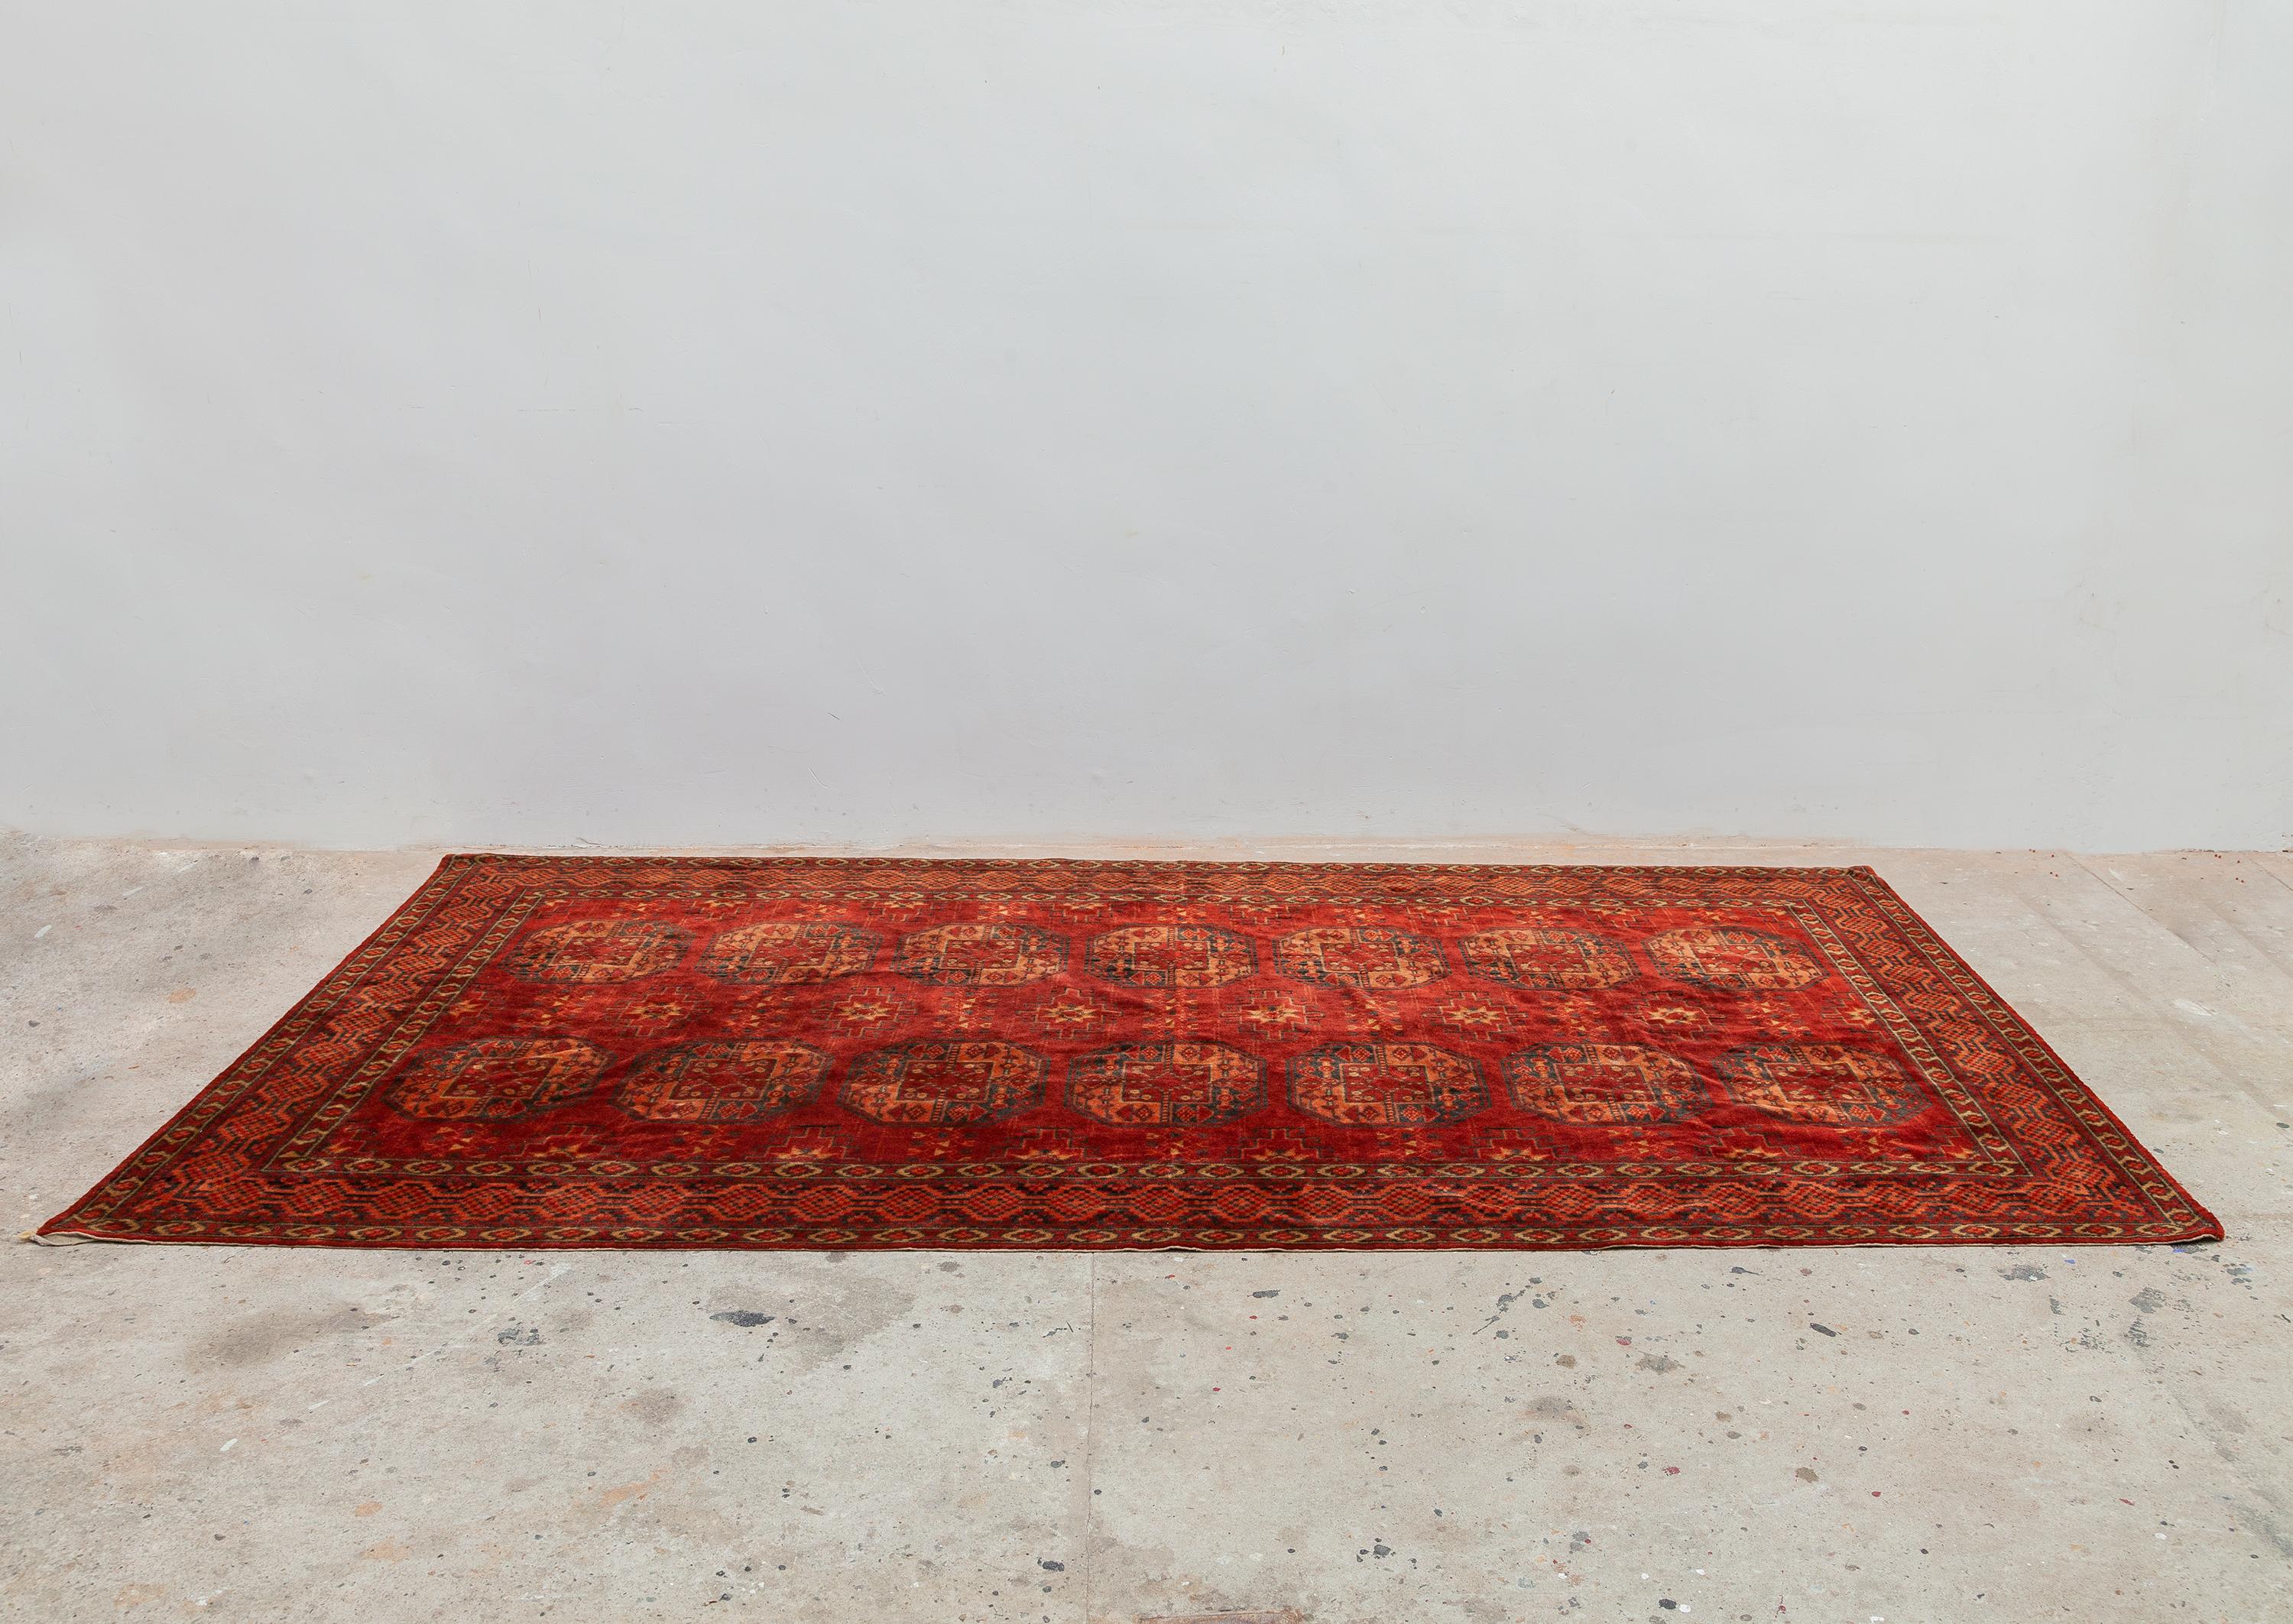 Antique Art Deco velvet fabric. Persian style woven motif. Warm red, orange and black velvety surface. Dimensions: 257W x 135H cm.